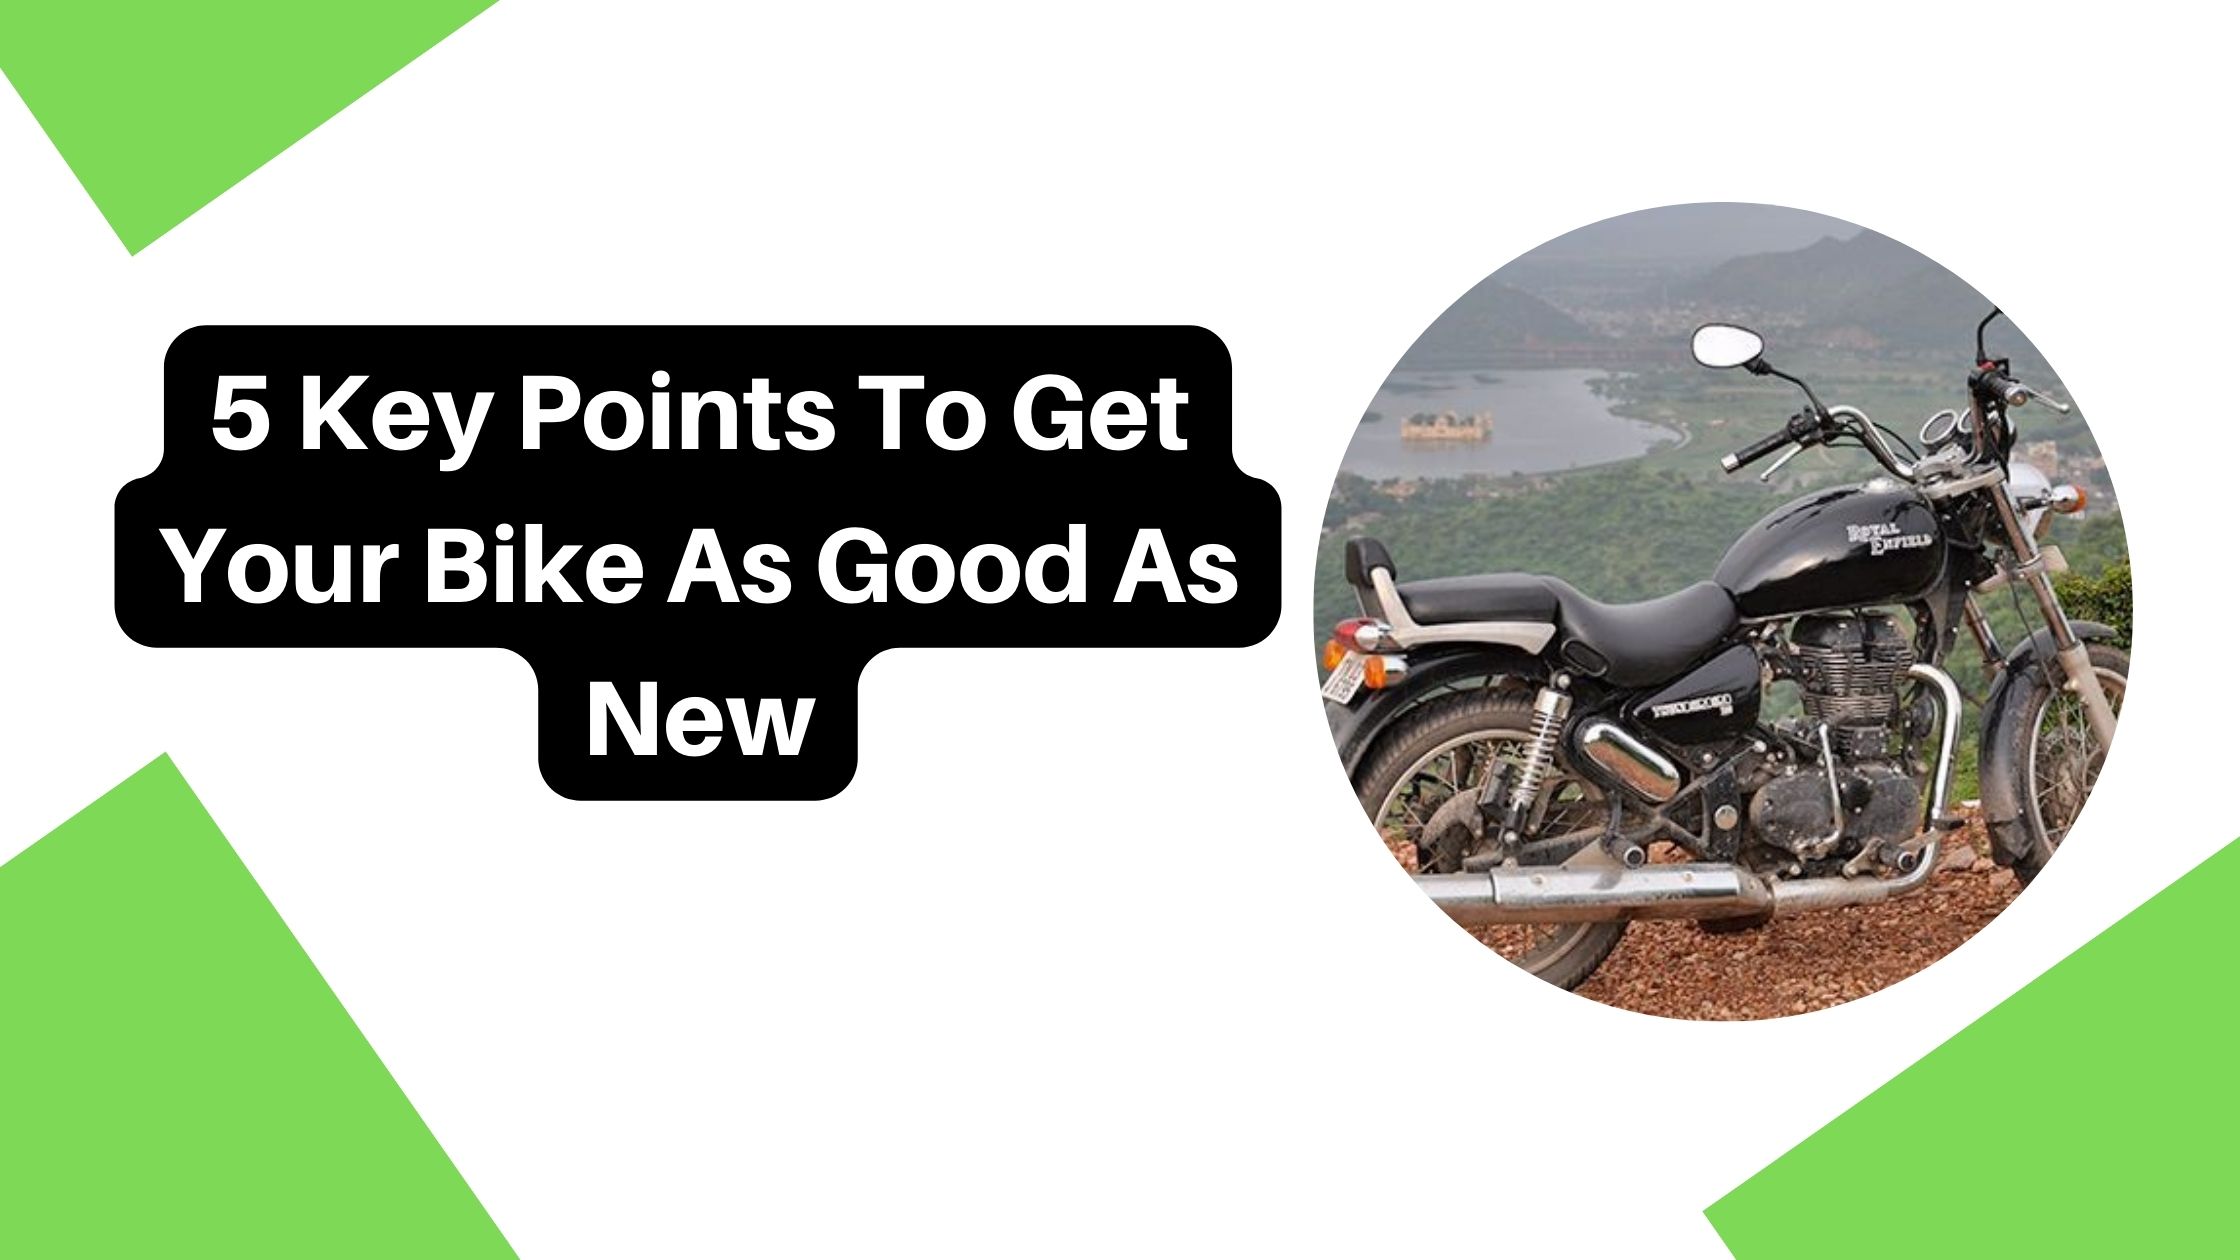 5 Key Points To Get Your Bike As Good As New